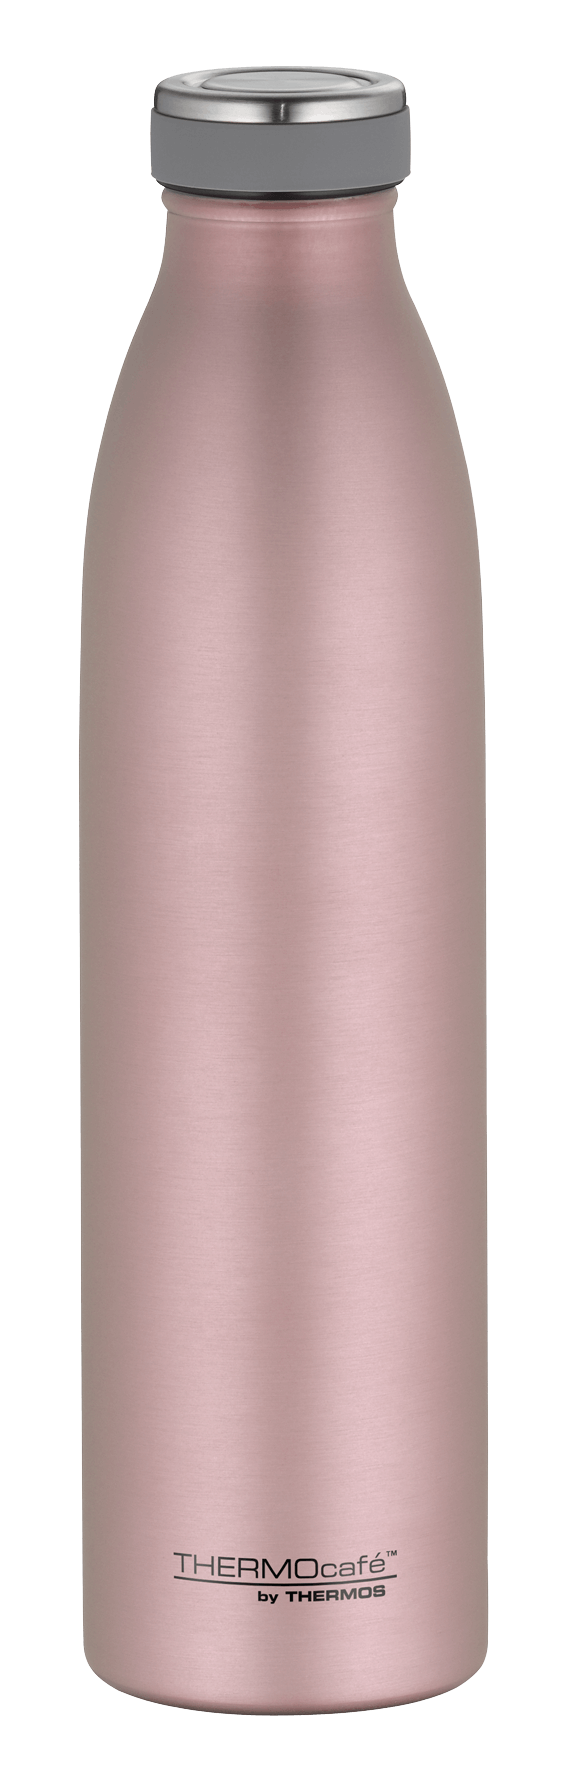 Thermos Isolier-Trinkflasche ThermoCafe 0,5 Liter Rose Gold Isolierflasche 